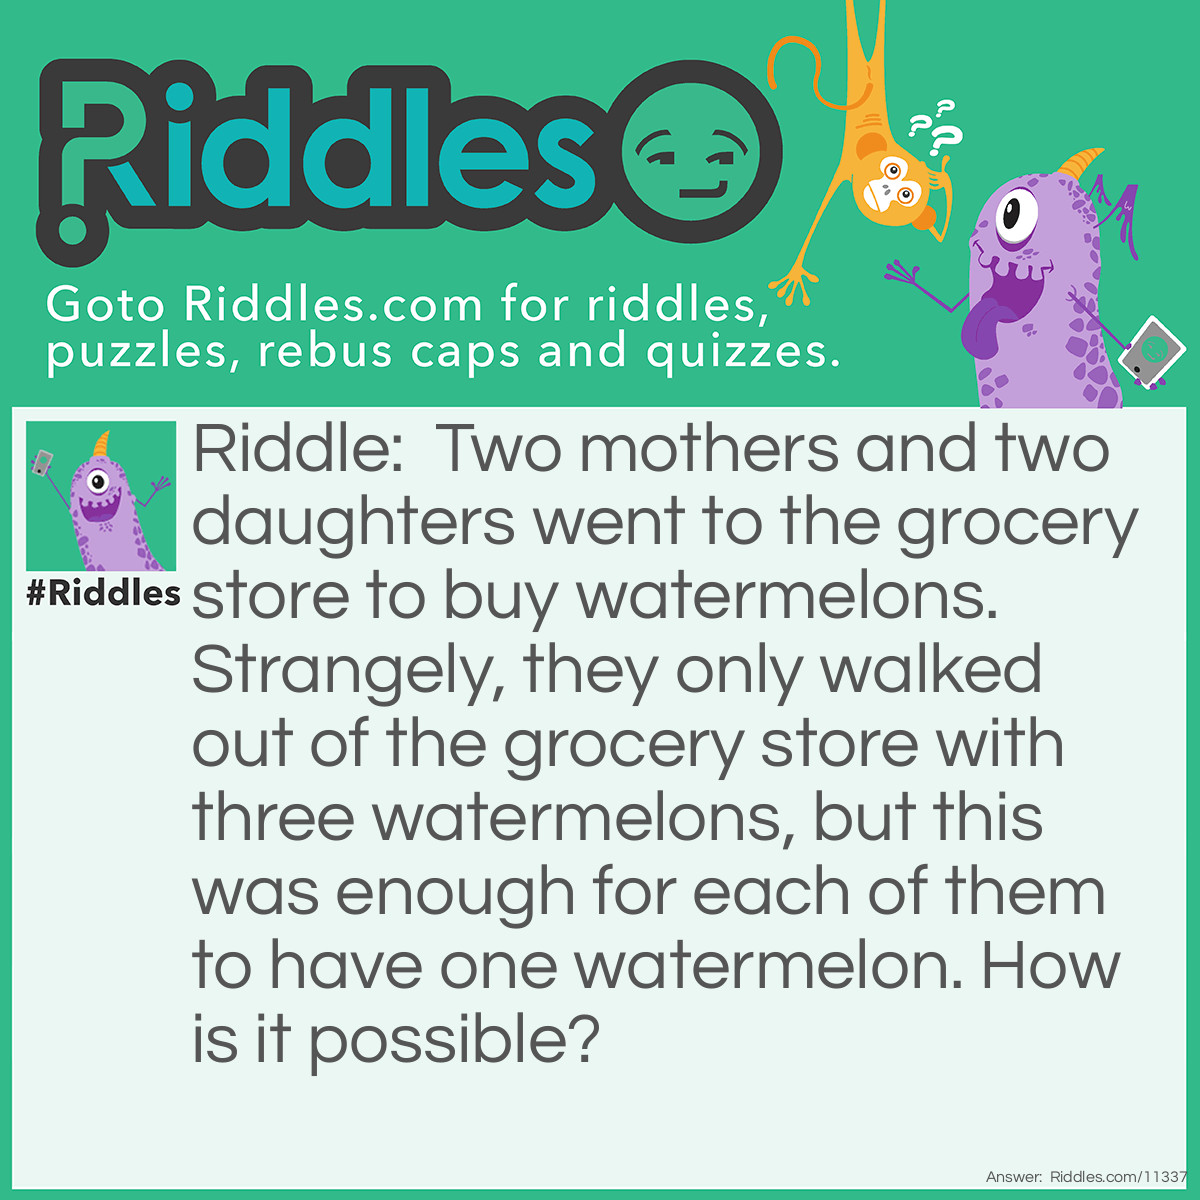 Riddle: Two mothers and two daughters went to the grocery store to buy watermelons. Strangely, they only walked out of the grocery store with three watermelons, but this was enough for each of them to have one watermelon. How is it possible? Answer: Only three people went grocery shopping: a grandmother, a mother, and a daughter. The grandmother is also a mother (she is the mother's mother), and the mother is also a daughter (she is the grandmother's daughter).